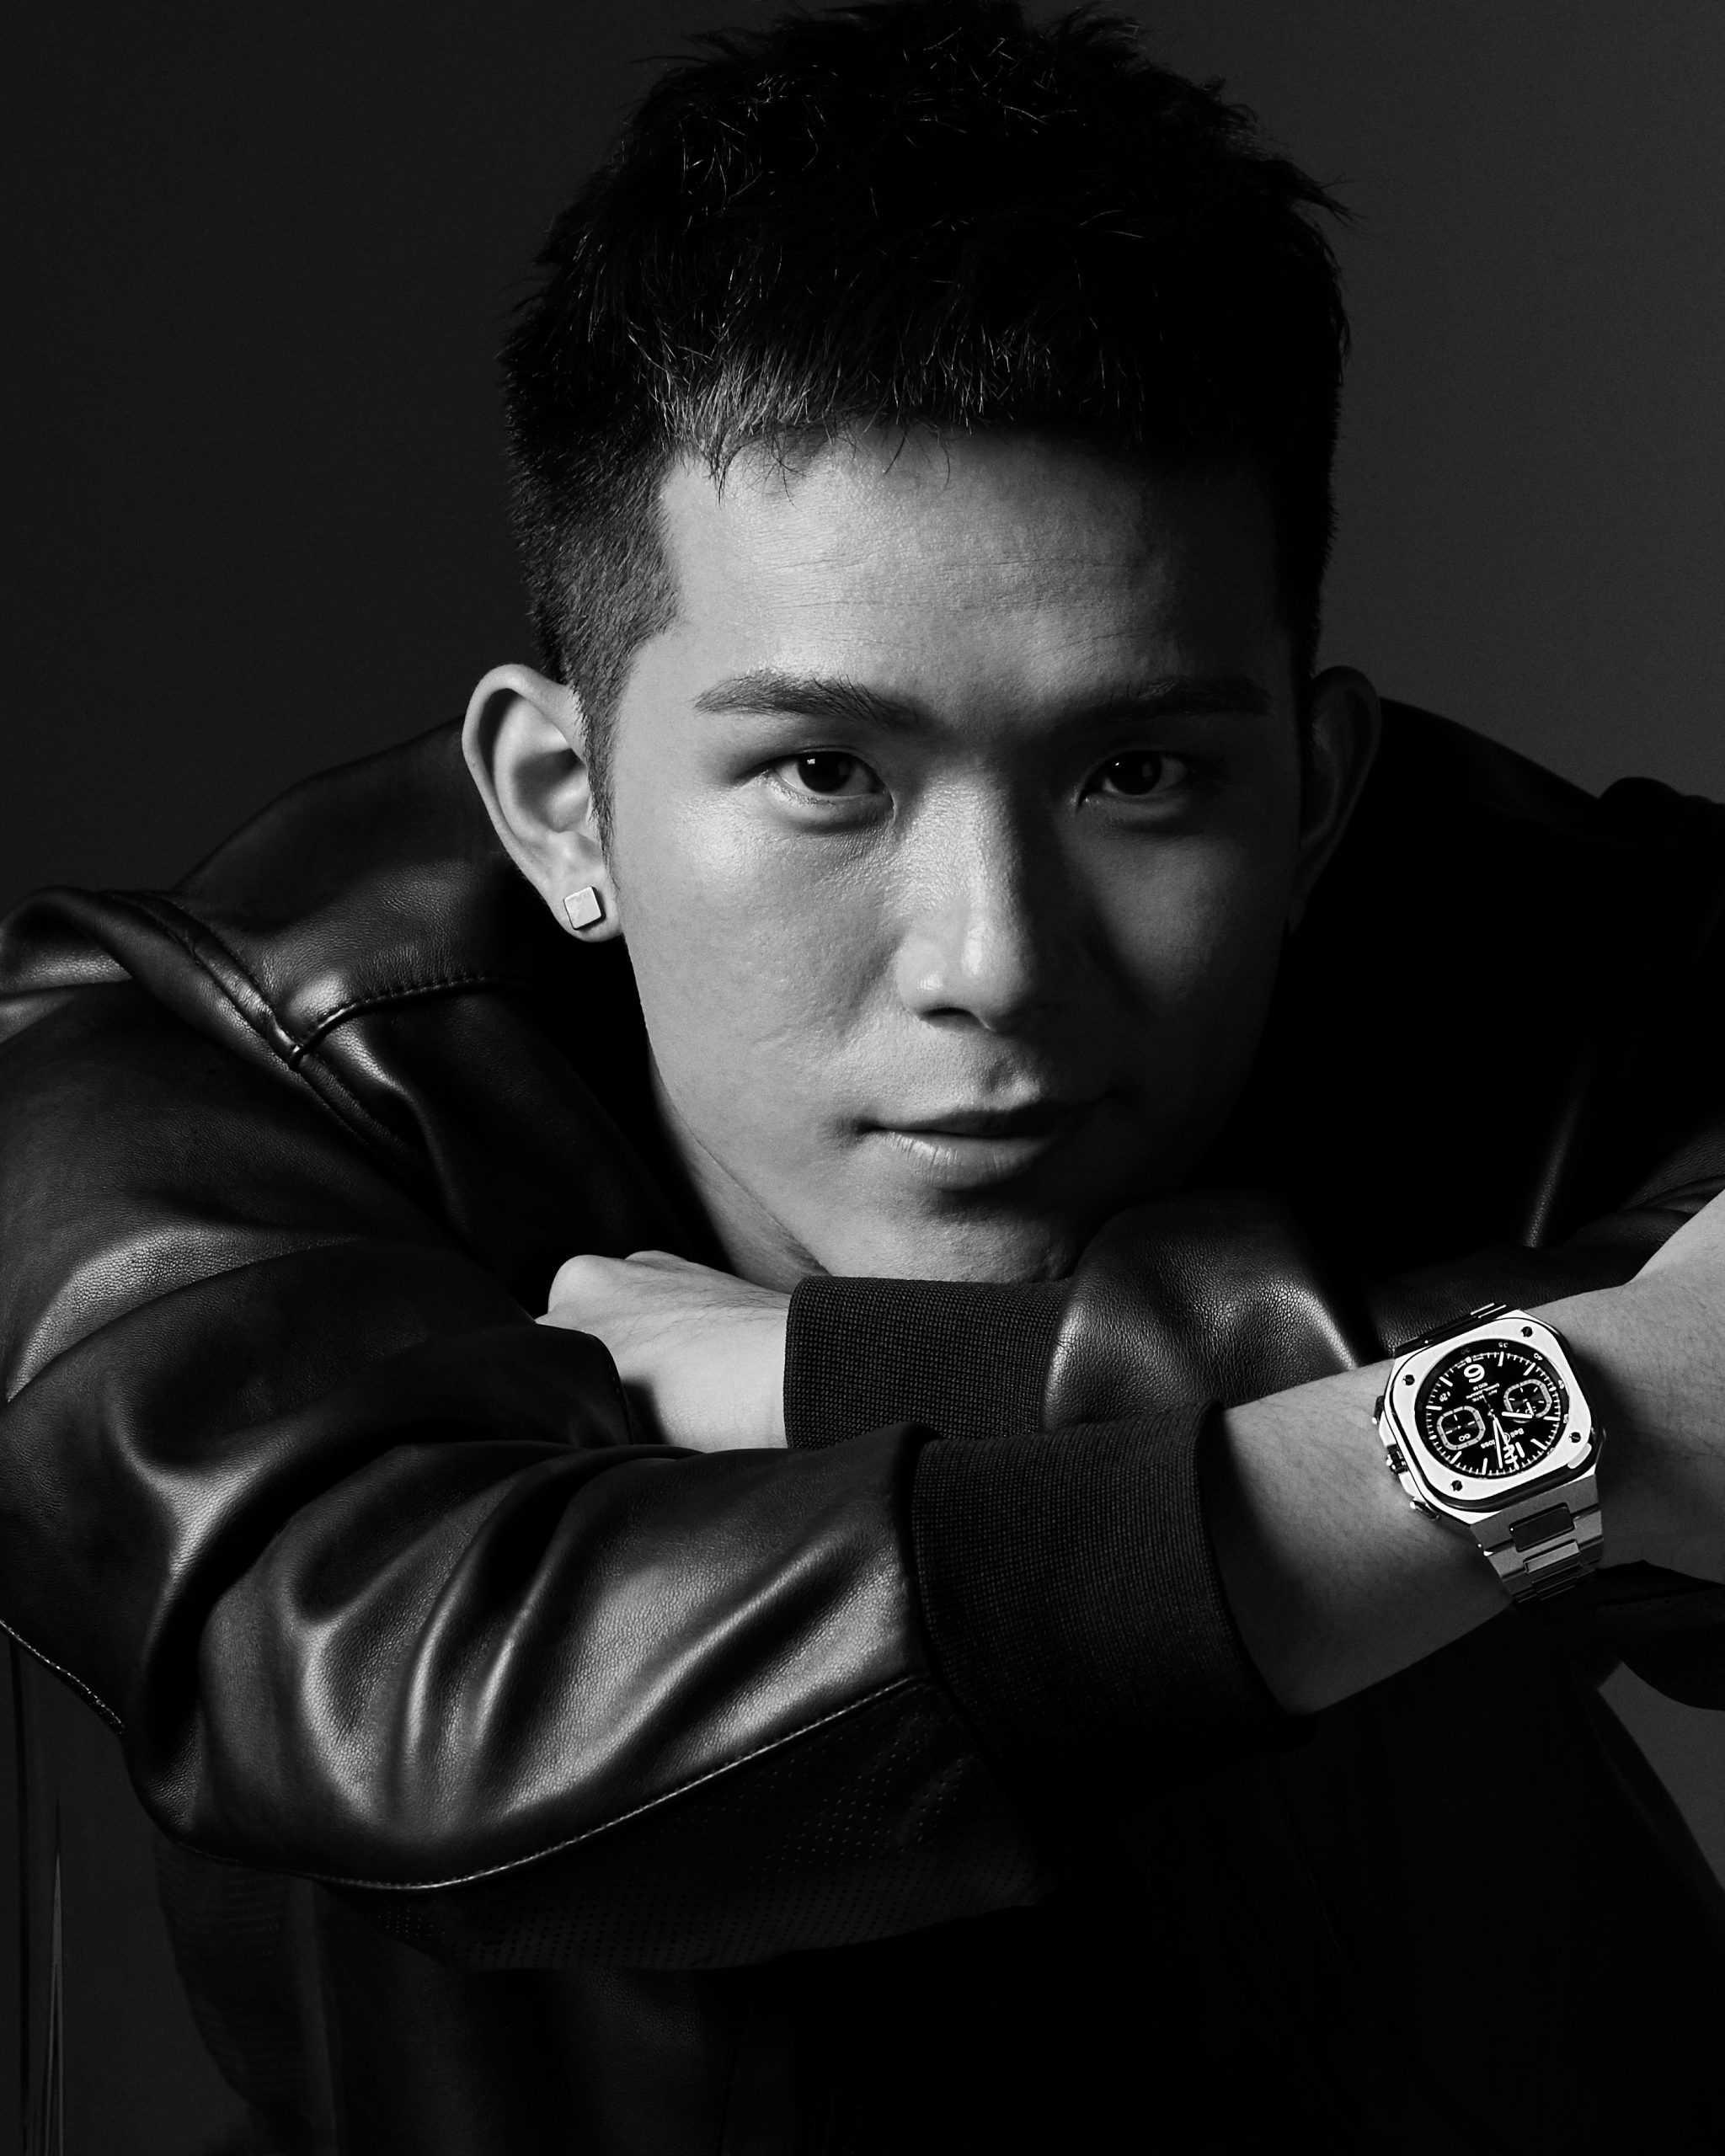 Bell & Ross welcomes 3 new Malaysian friends to the brand